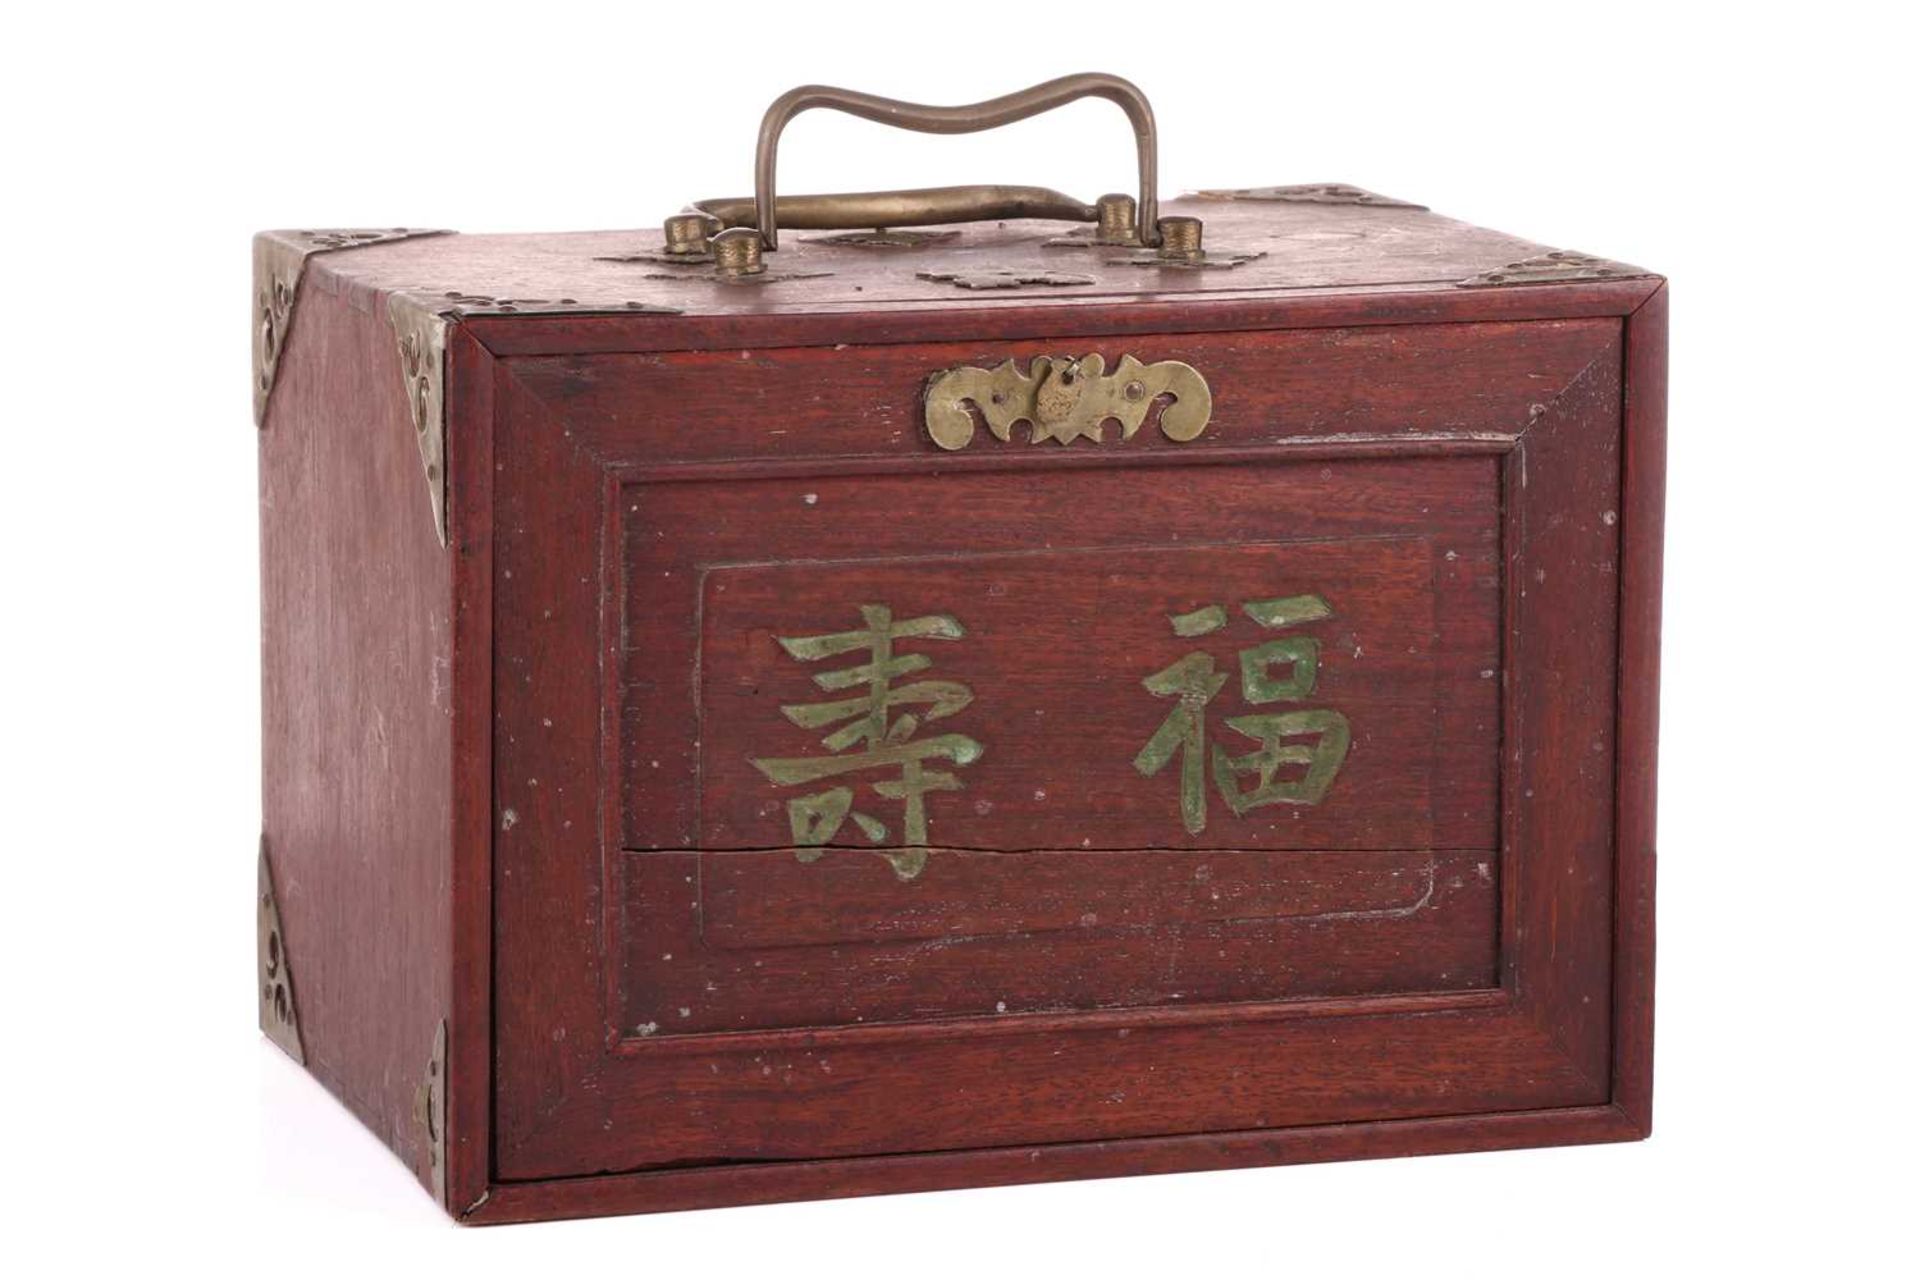 A Chinese rosewood-cased mahjong set with bone and bamboo tiles the sliding door bearing the word